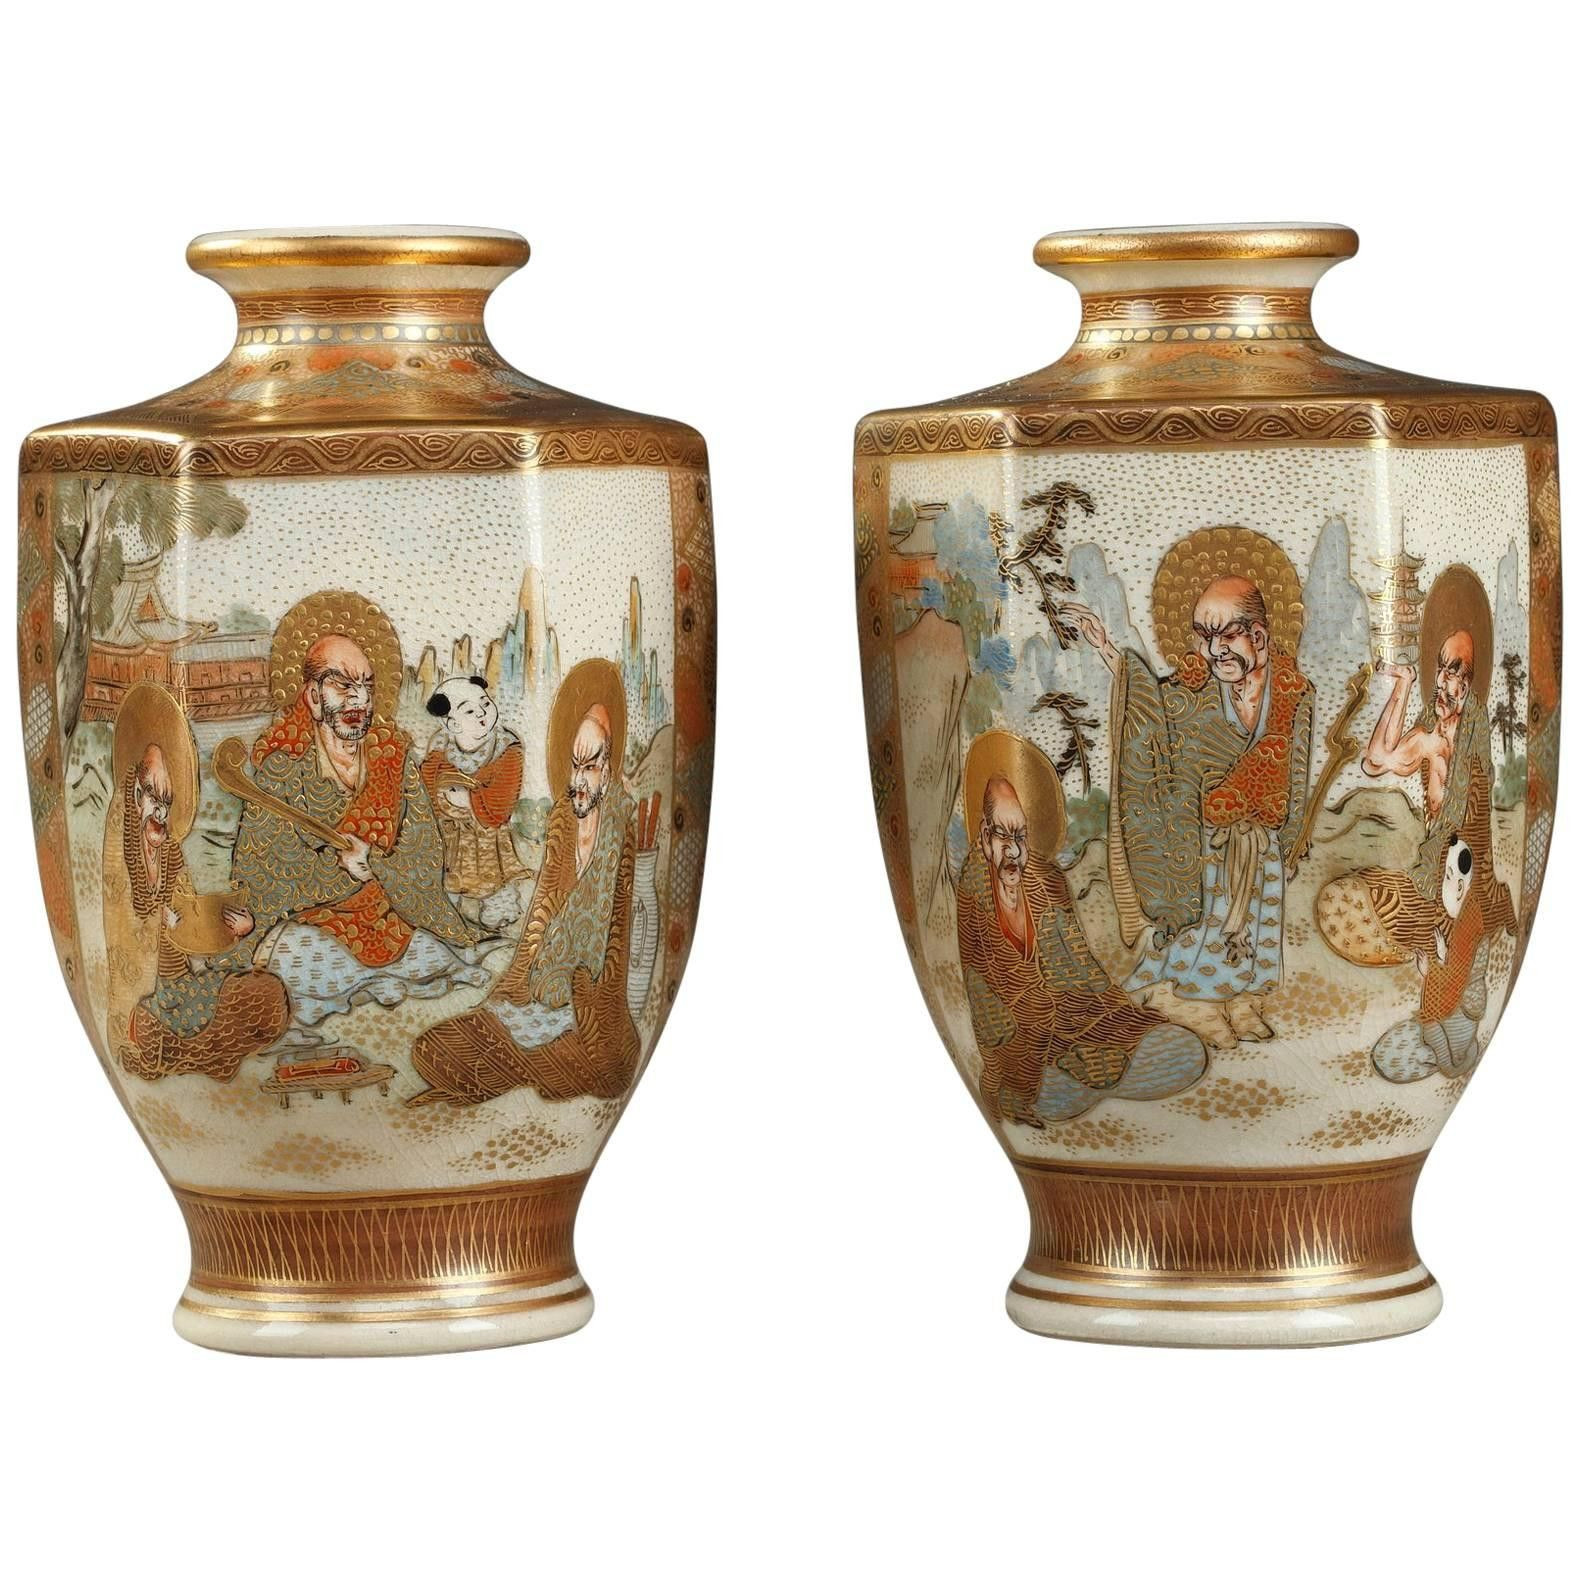 18 Spectacular Luxury Vases for Sale 2024 free download luxury vases for sale of 18 mid century glass vase the weekly world inside chinese ginger jar table lamps new vases chinese vase with lid